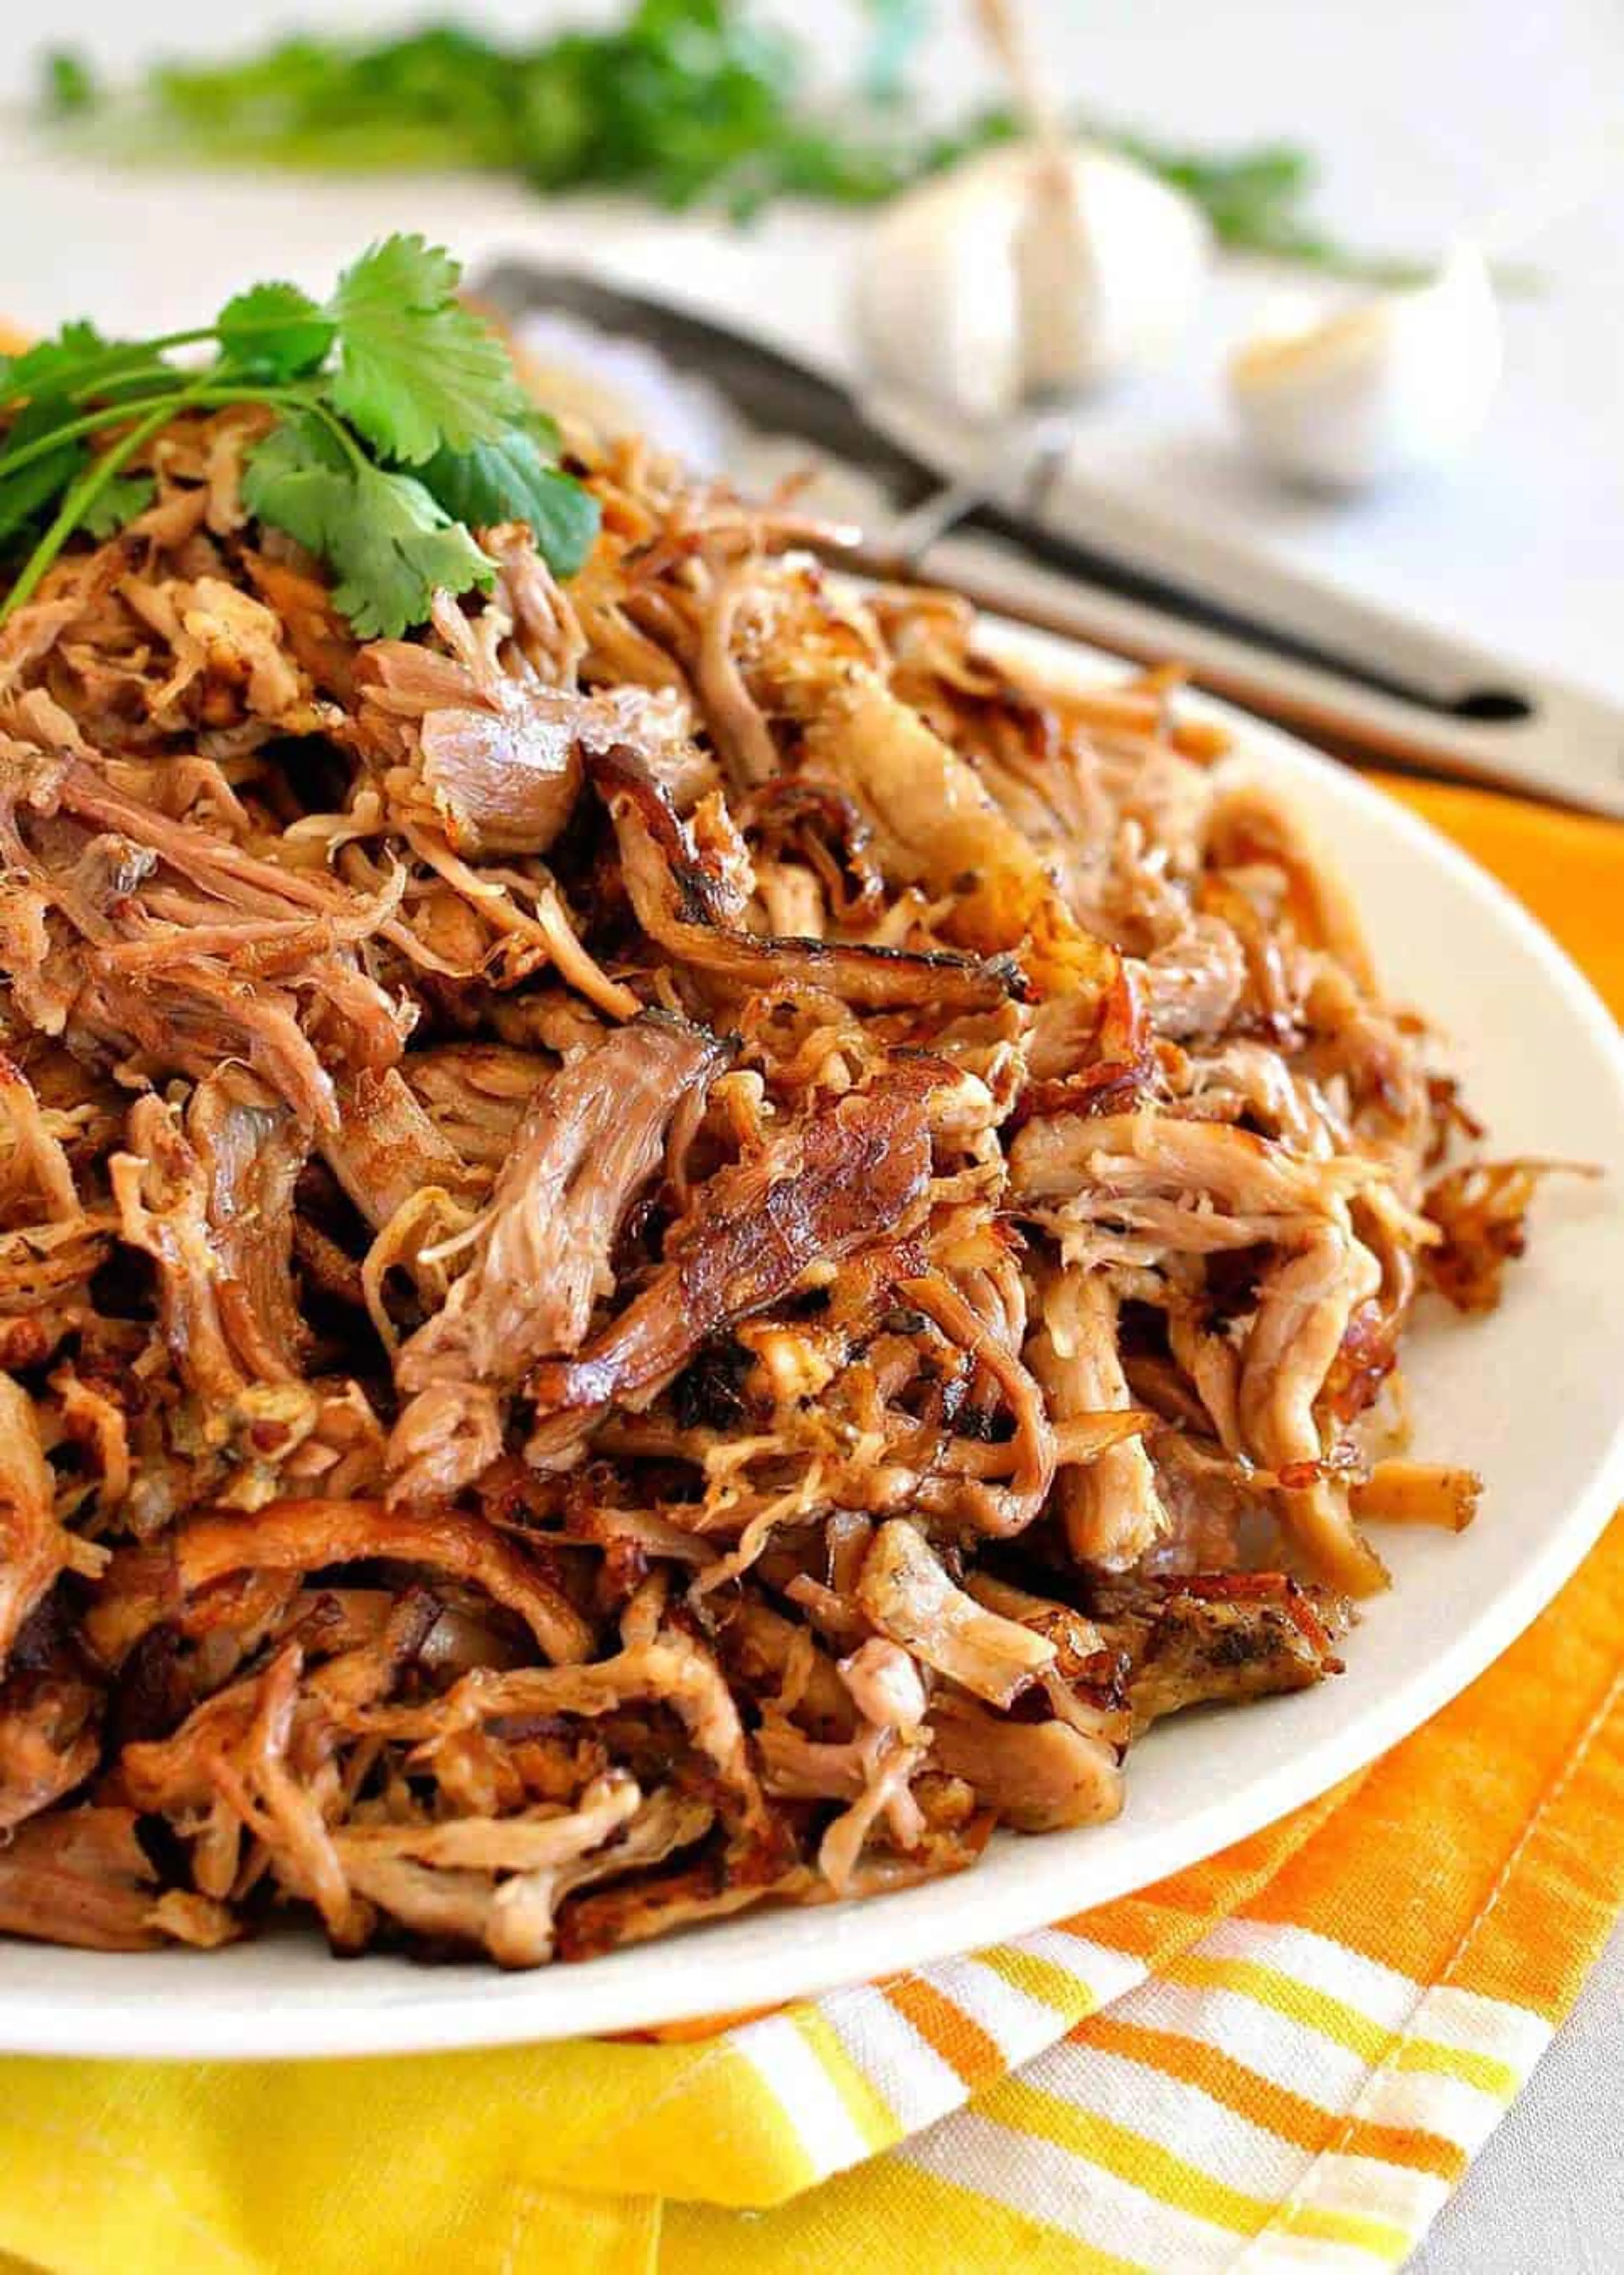 Carnitas (Mexican Slow Cooker Pulled Pork)